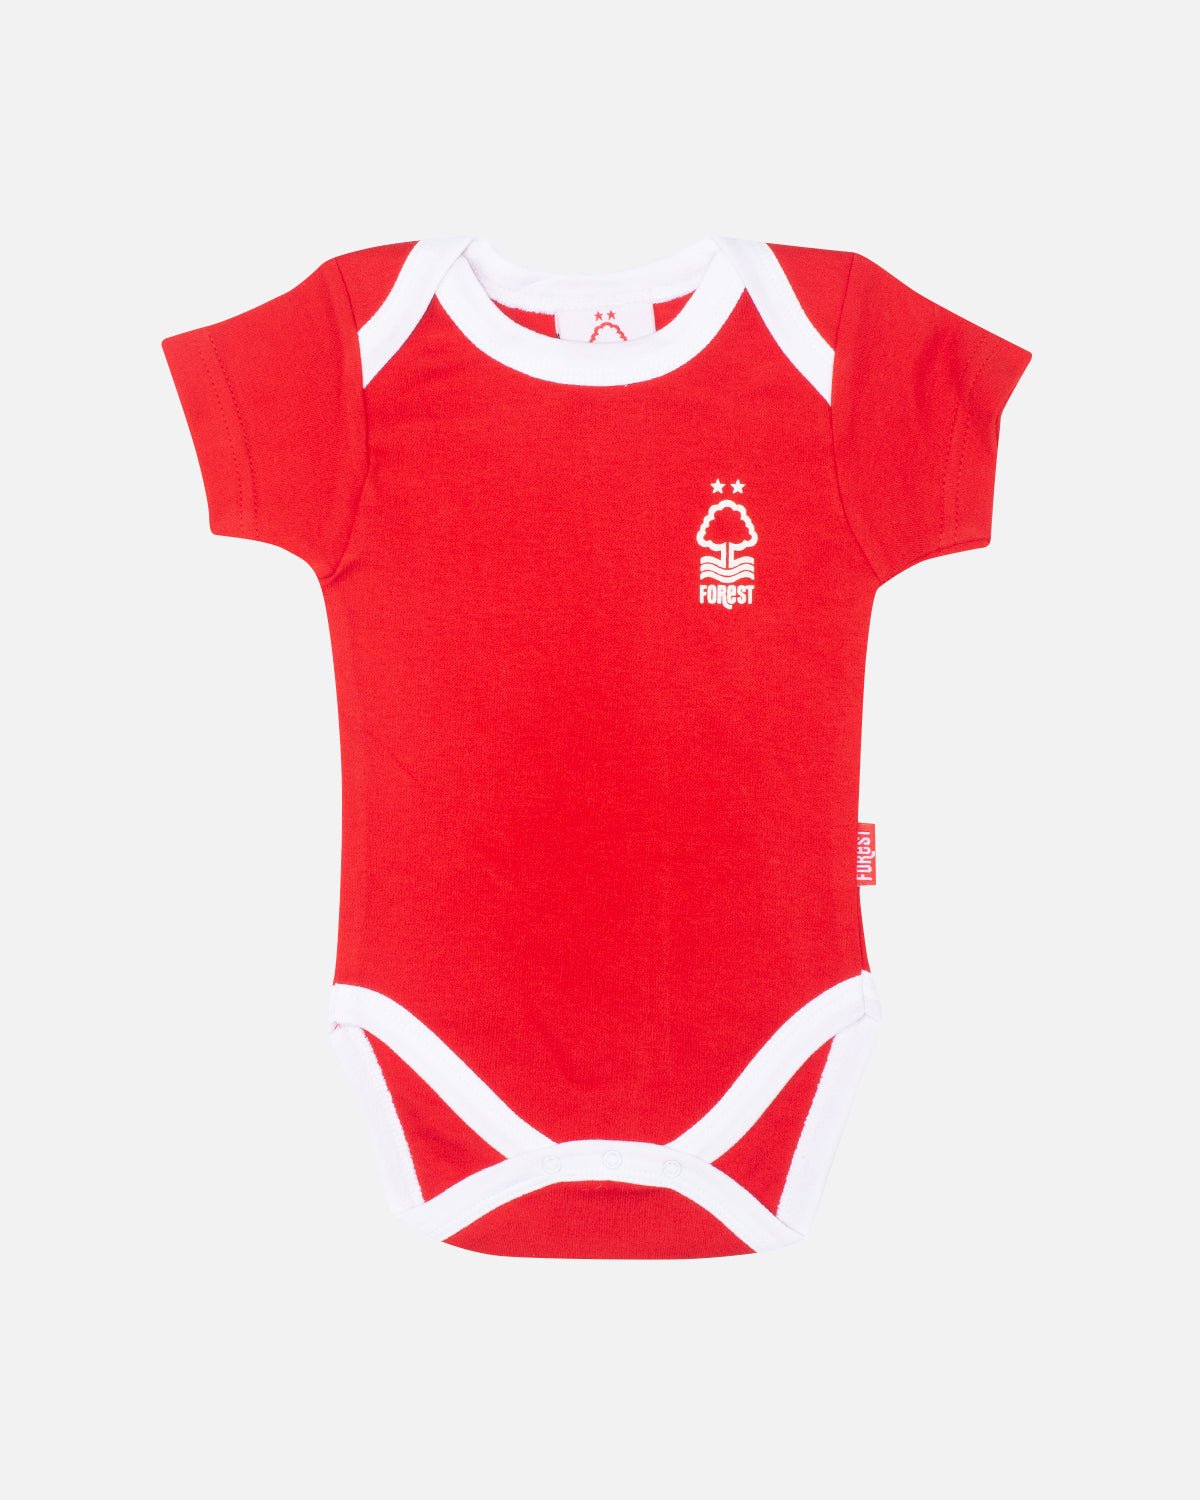 NFFC Baby Red Bodysuit - Nottingham Forest FC